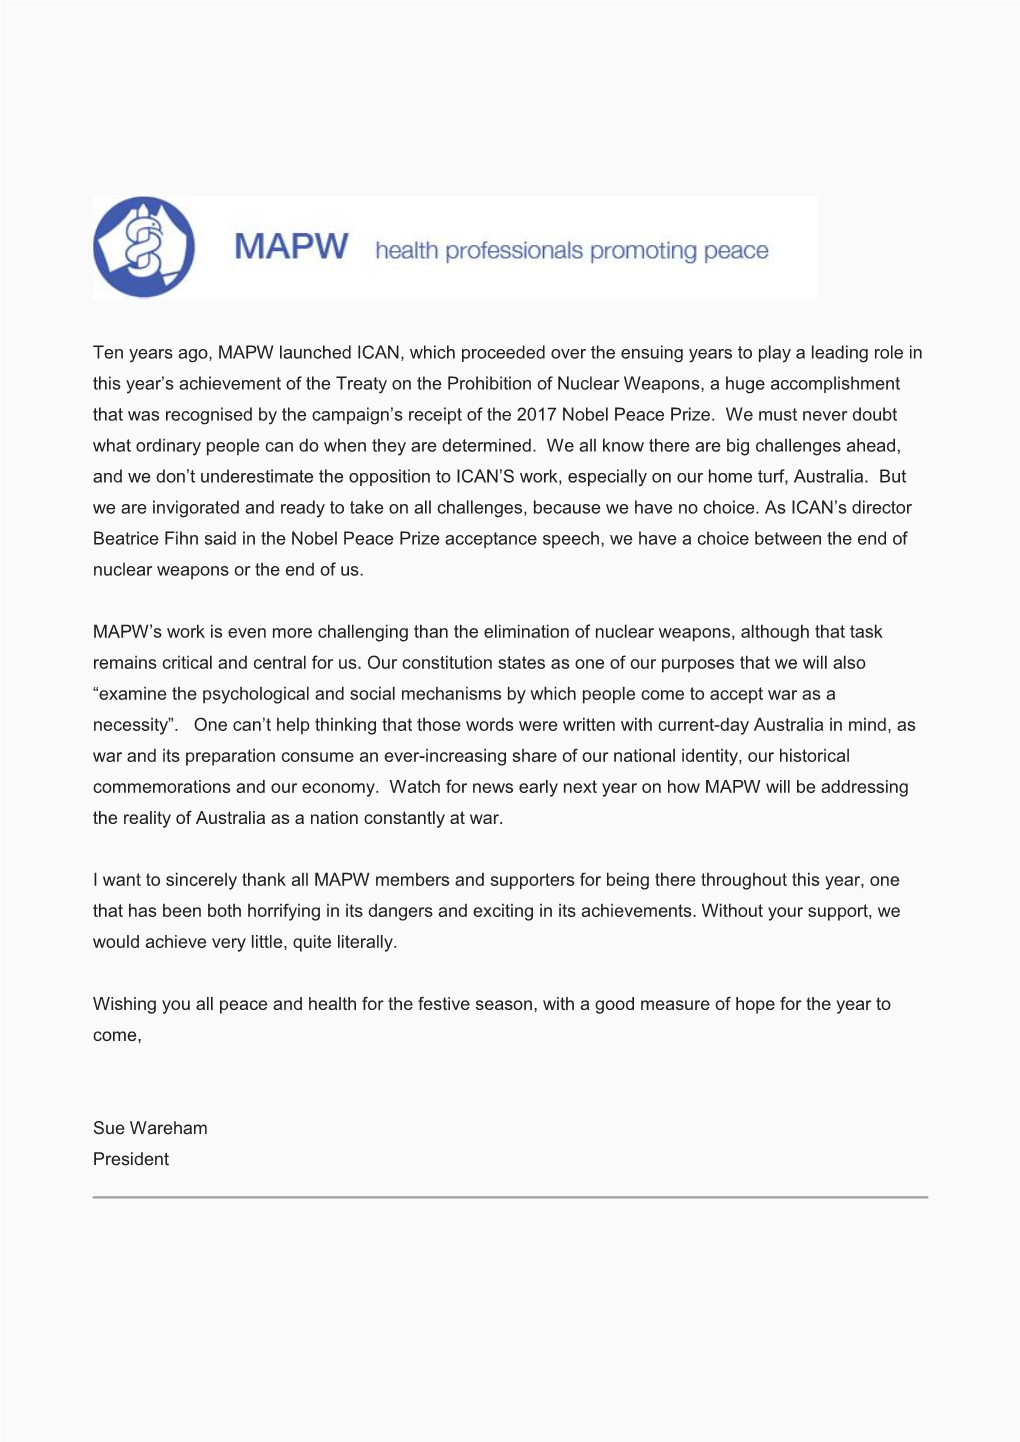 Ten Years Ago, MAPW Launched ICAN, Which Proceeded Over the Ensuing